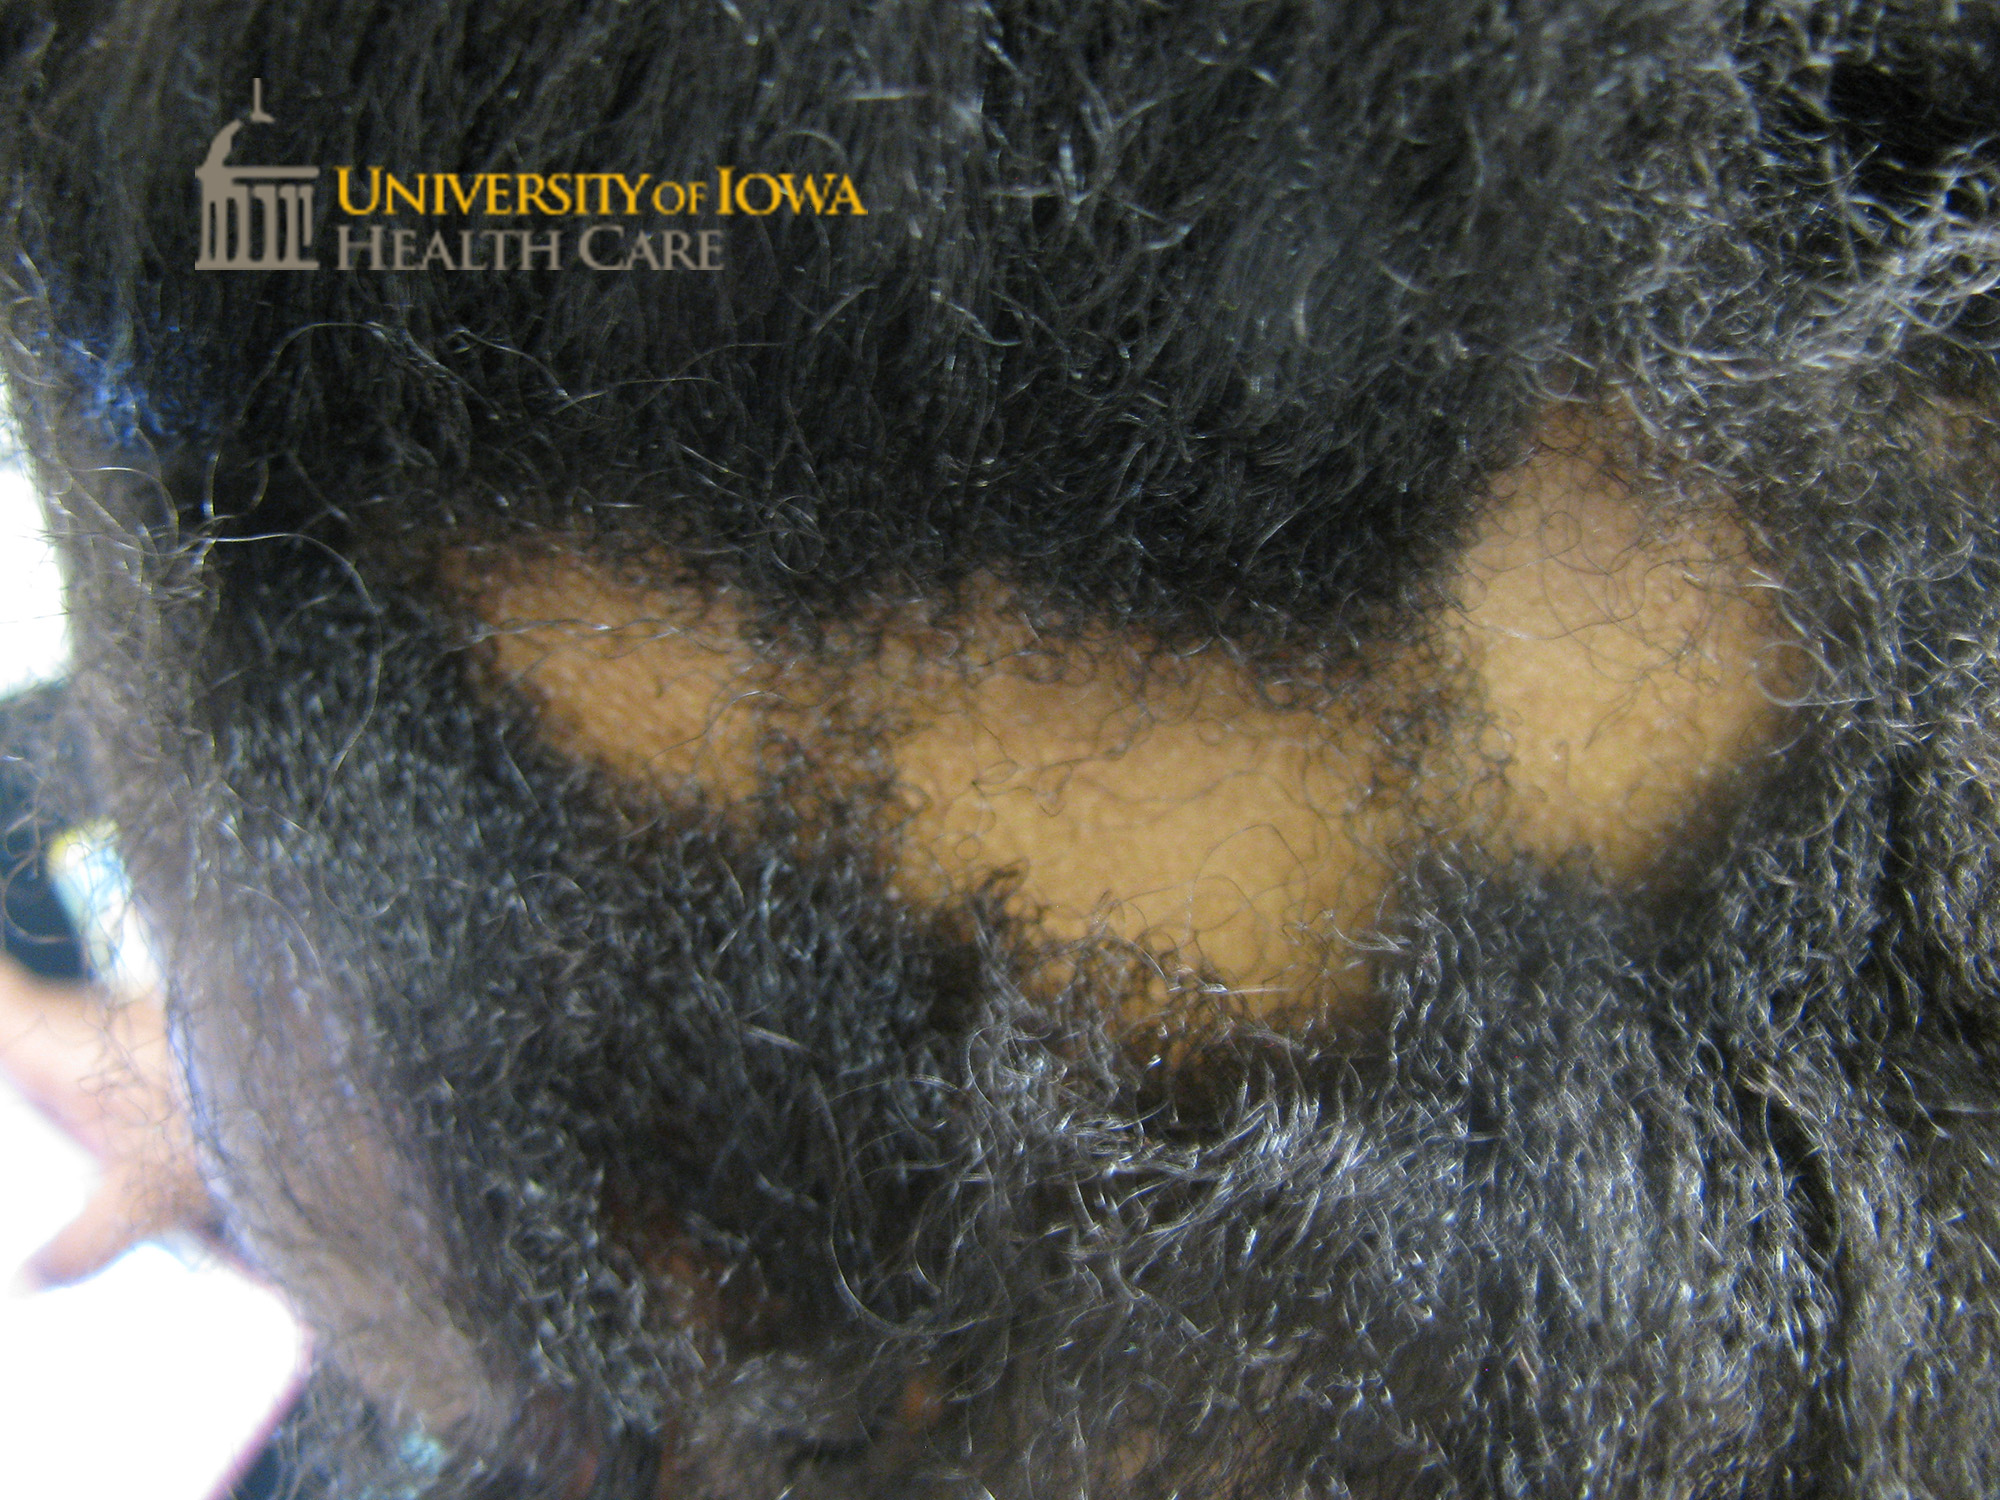 Round patch of nonscarring alopecia on the scalp. (click images for higher resolution).